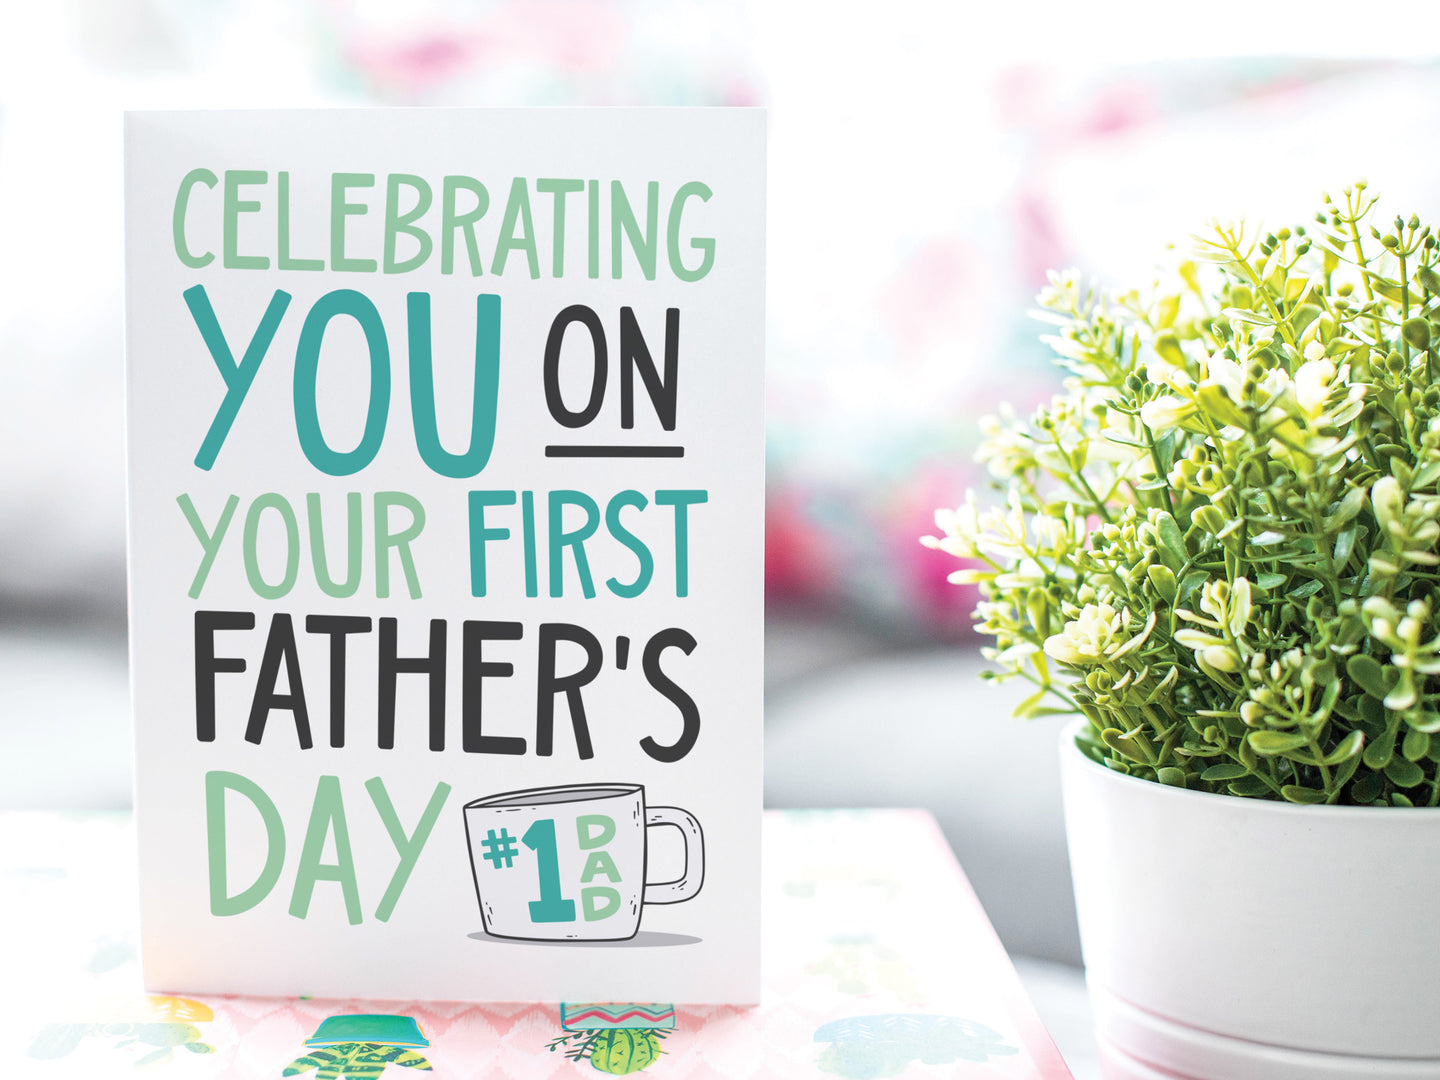 A greeting card is on a table top with a gift in pink wrapping paper. Next to the gift is a white plant pot with a green plant. The card features the words 